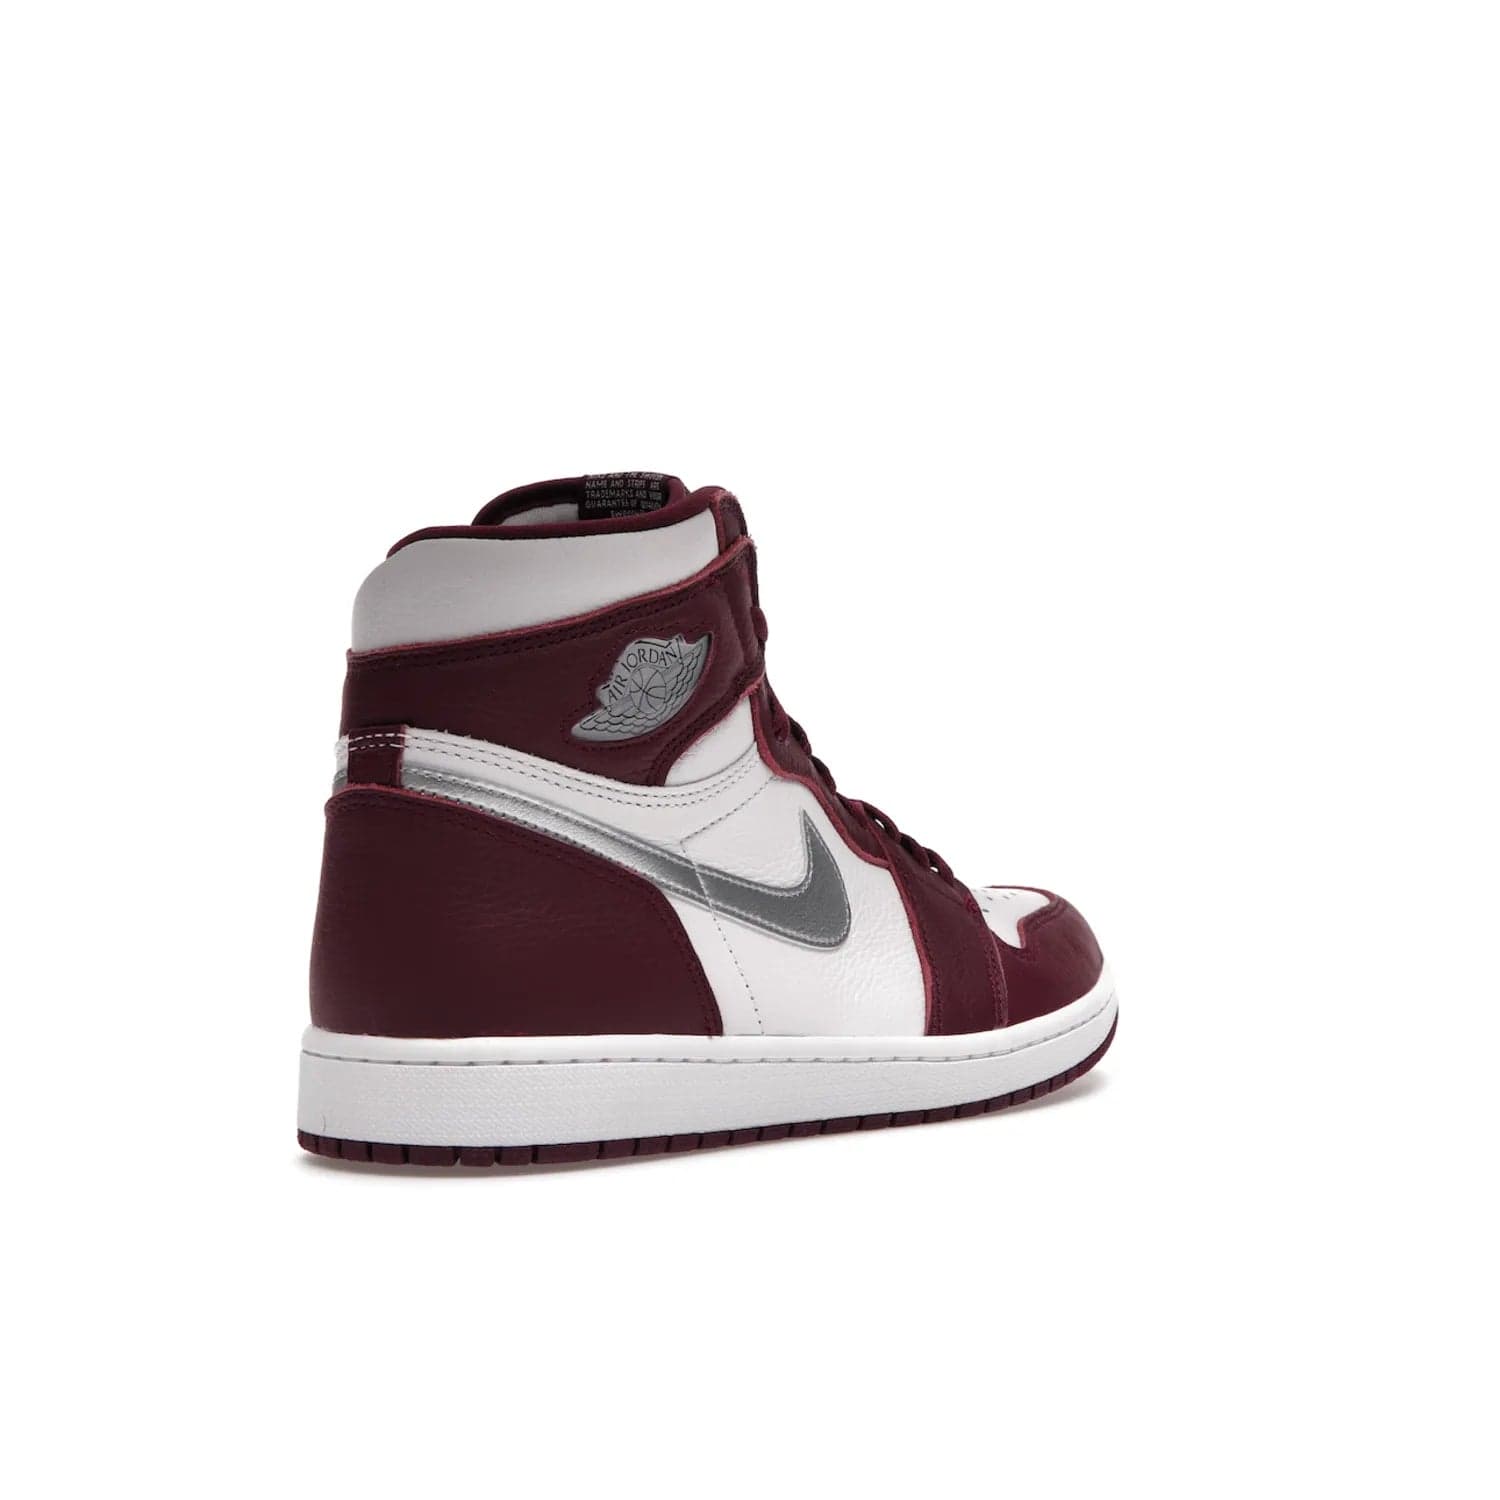 Jordan 1 Retro High OG Bordeaux - Image 32 - Only at www.BallersClubKickz.com - Shop the classic Air Jordan 1 High Bordeaux with a modern high-top cut. The timeless Bordeaux and White-Metallic Silver colorway, releasing Nov 20, 2021, is perfect for practice or a night out.